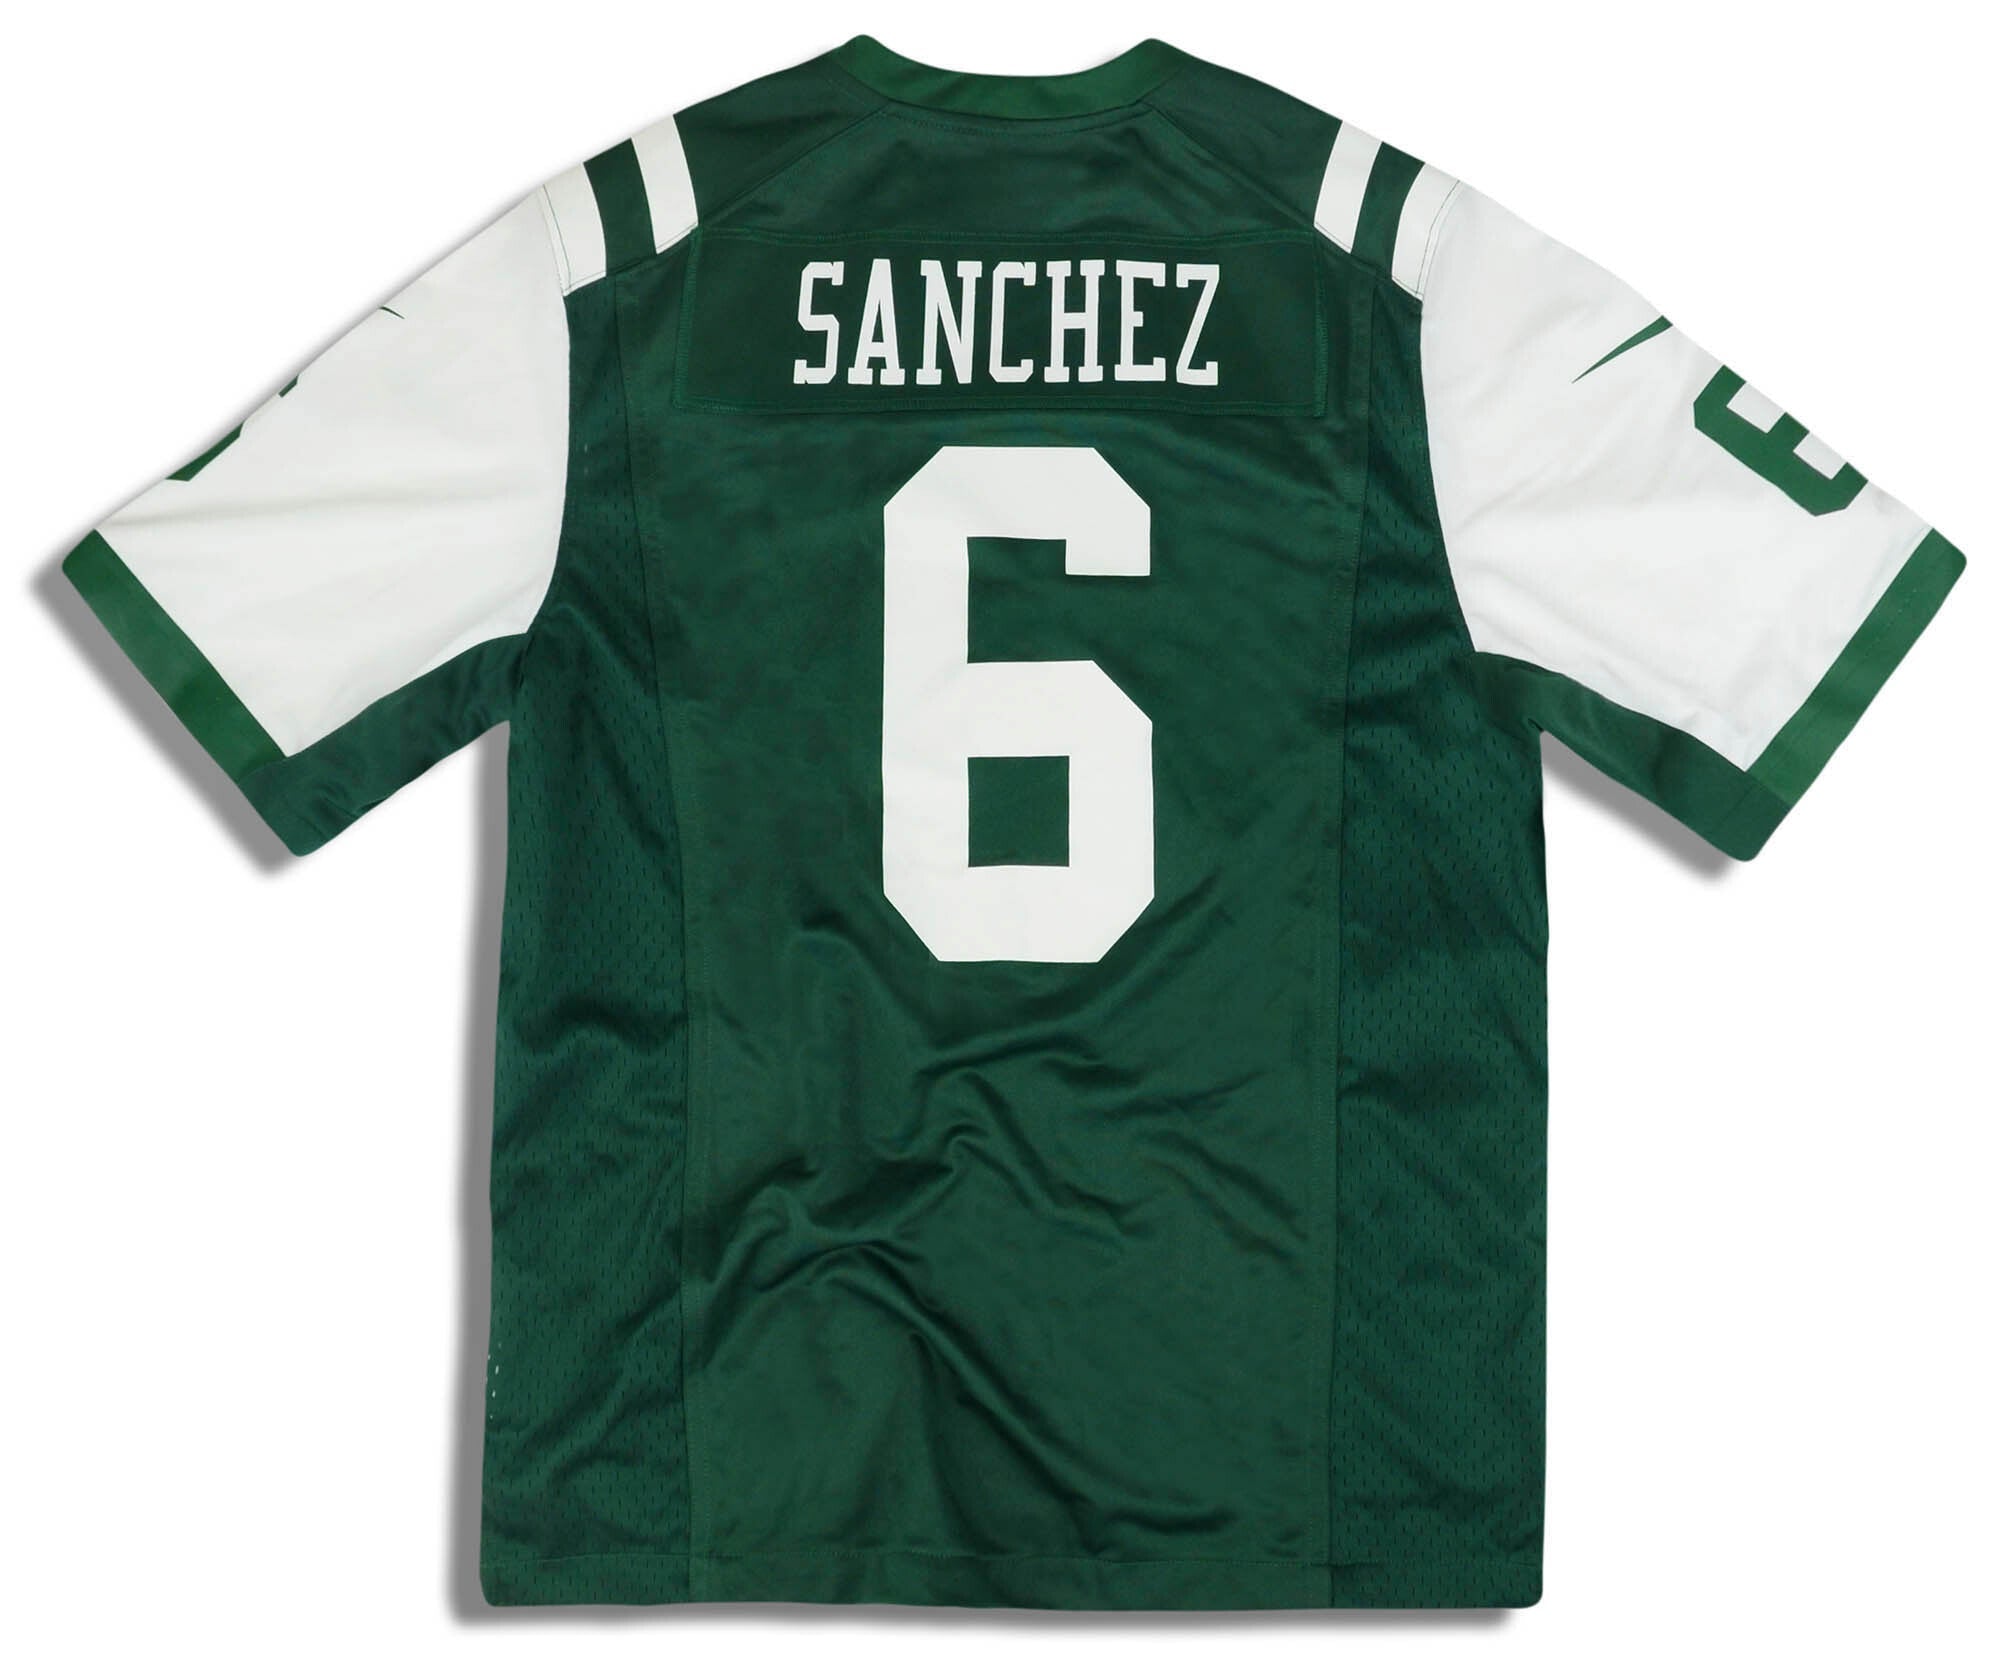 2012-13 NEW YORK JETS SANCHEZ #6 NIKE GAME JERSEY (HOME) L